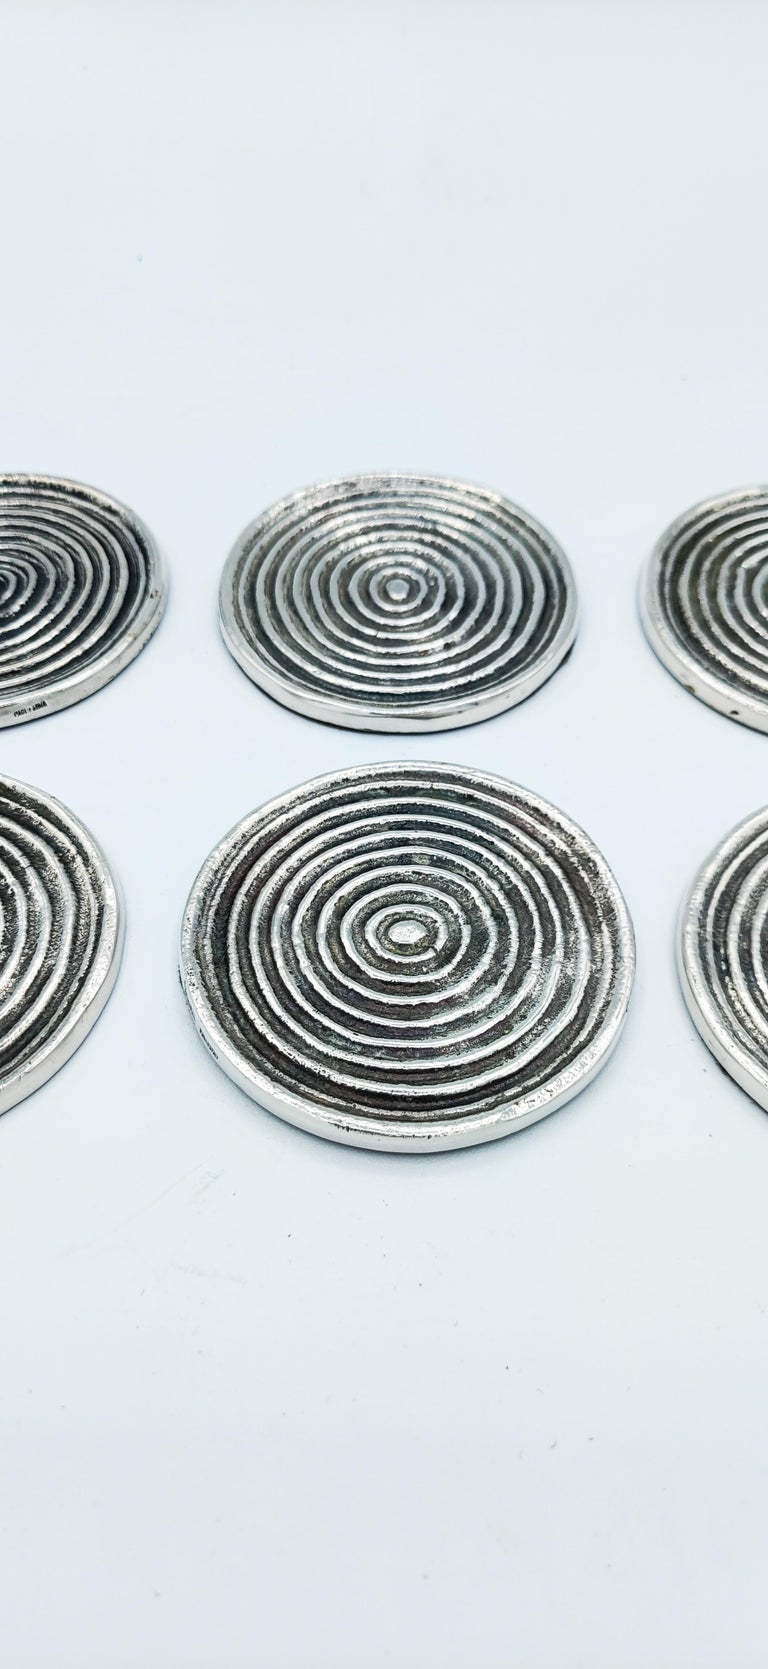 Spanish Set of 6 Silver Metal Coasters by Valenti, Spain 1970s